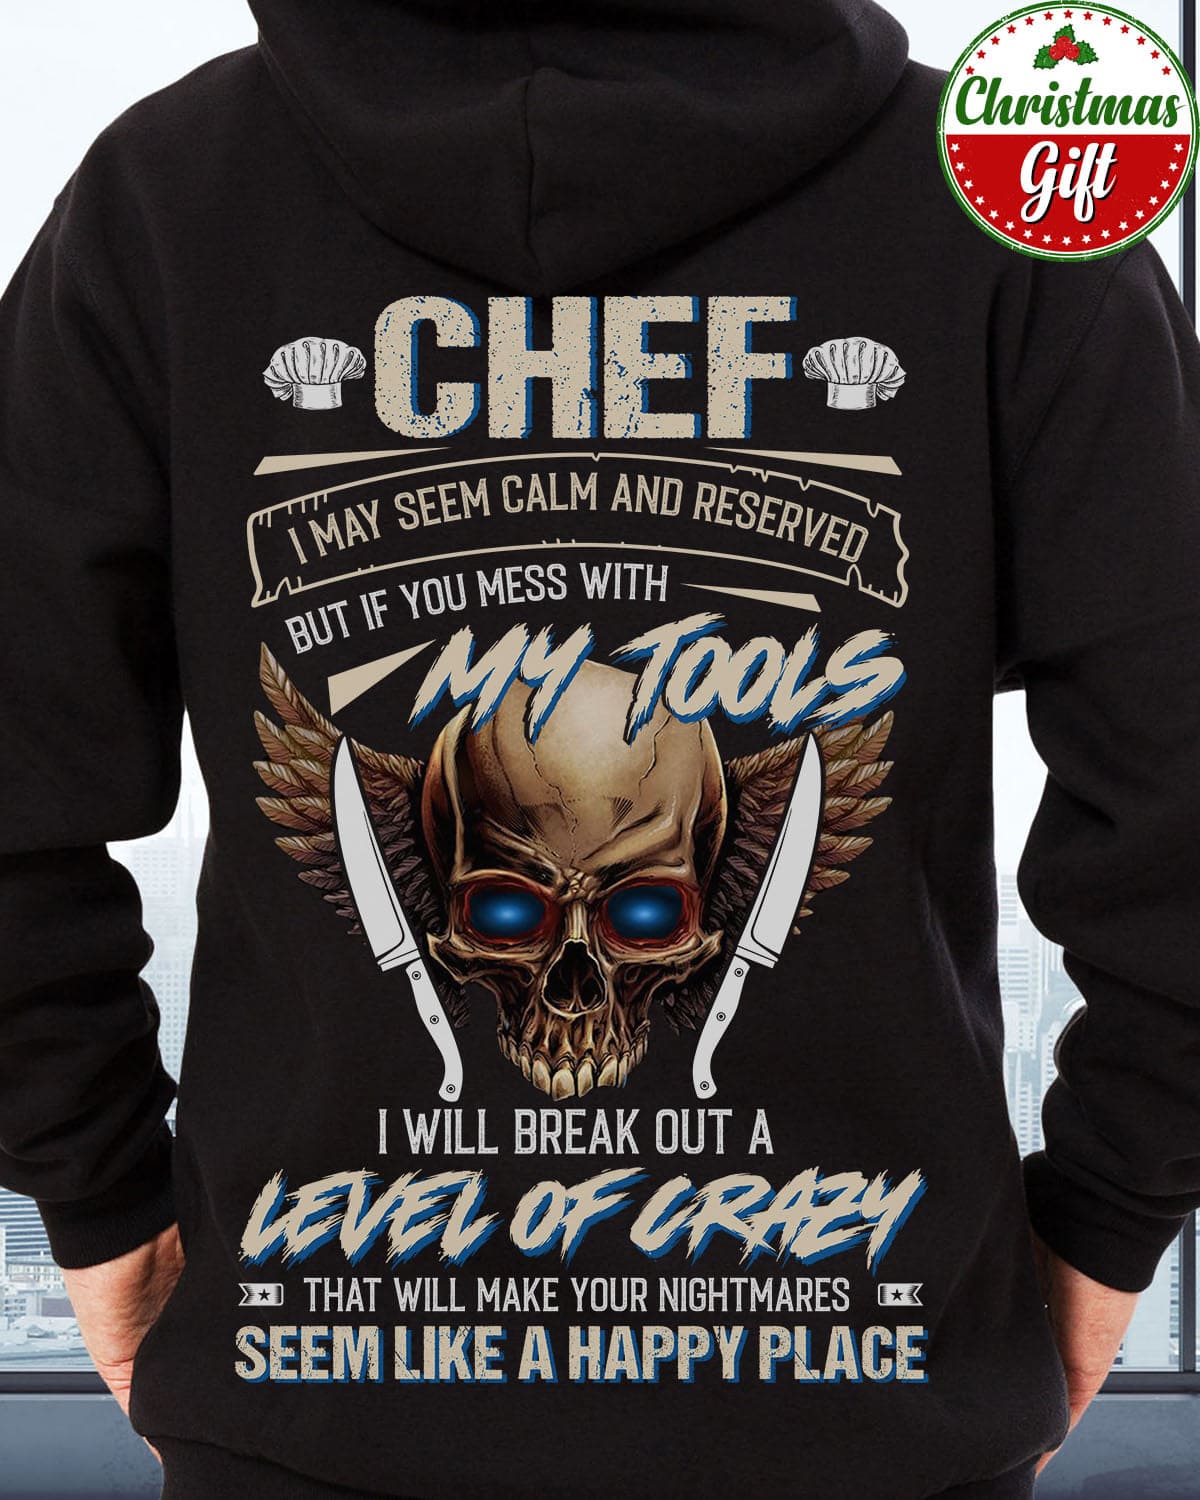 Evil Skull Chef - Chef i may seem calm and reserved but if you mess with my tools i will break out a level of crazy